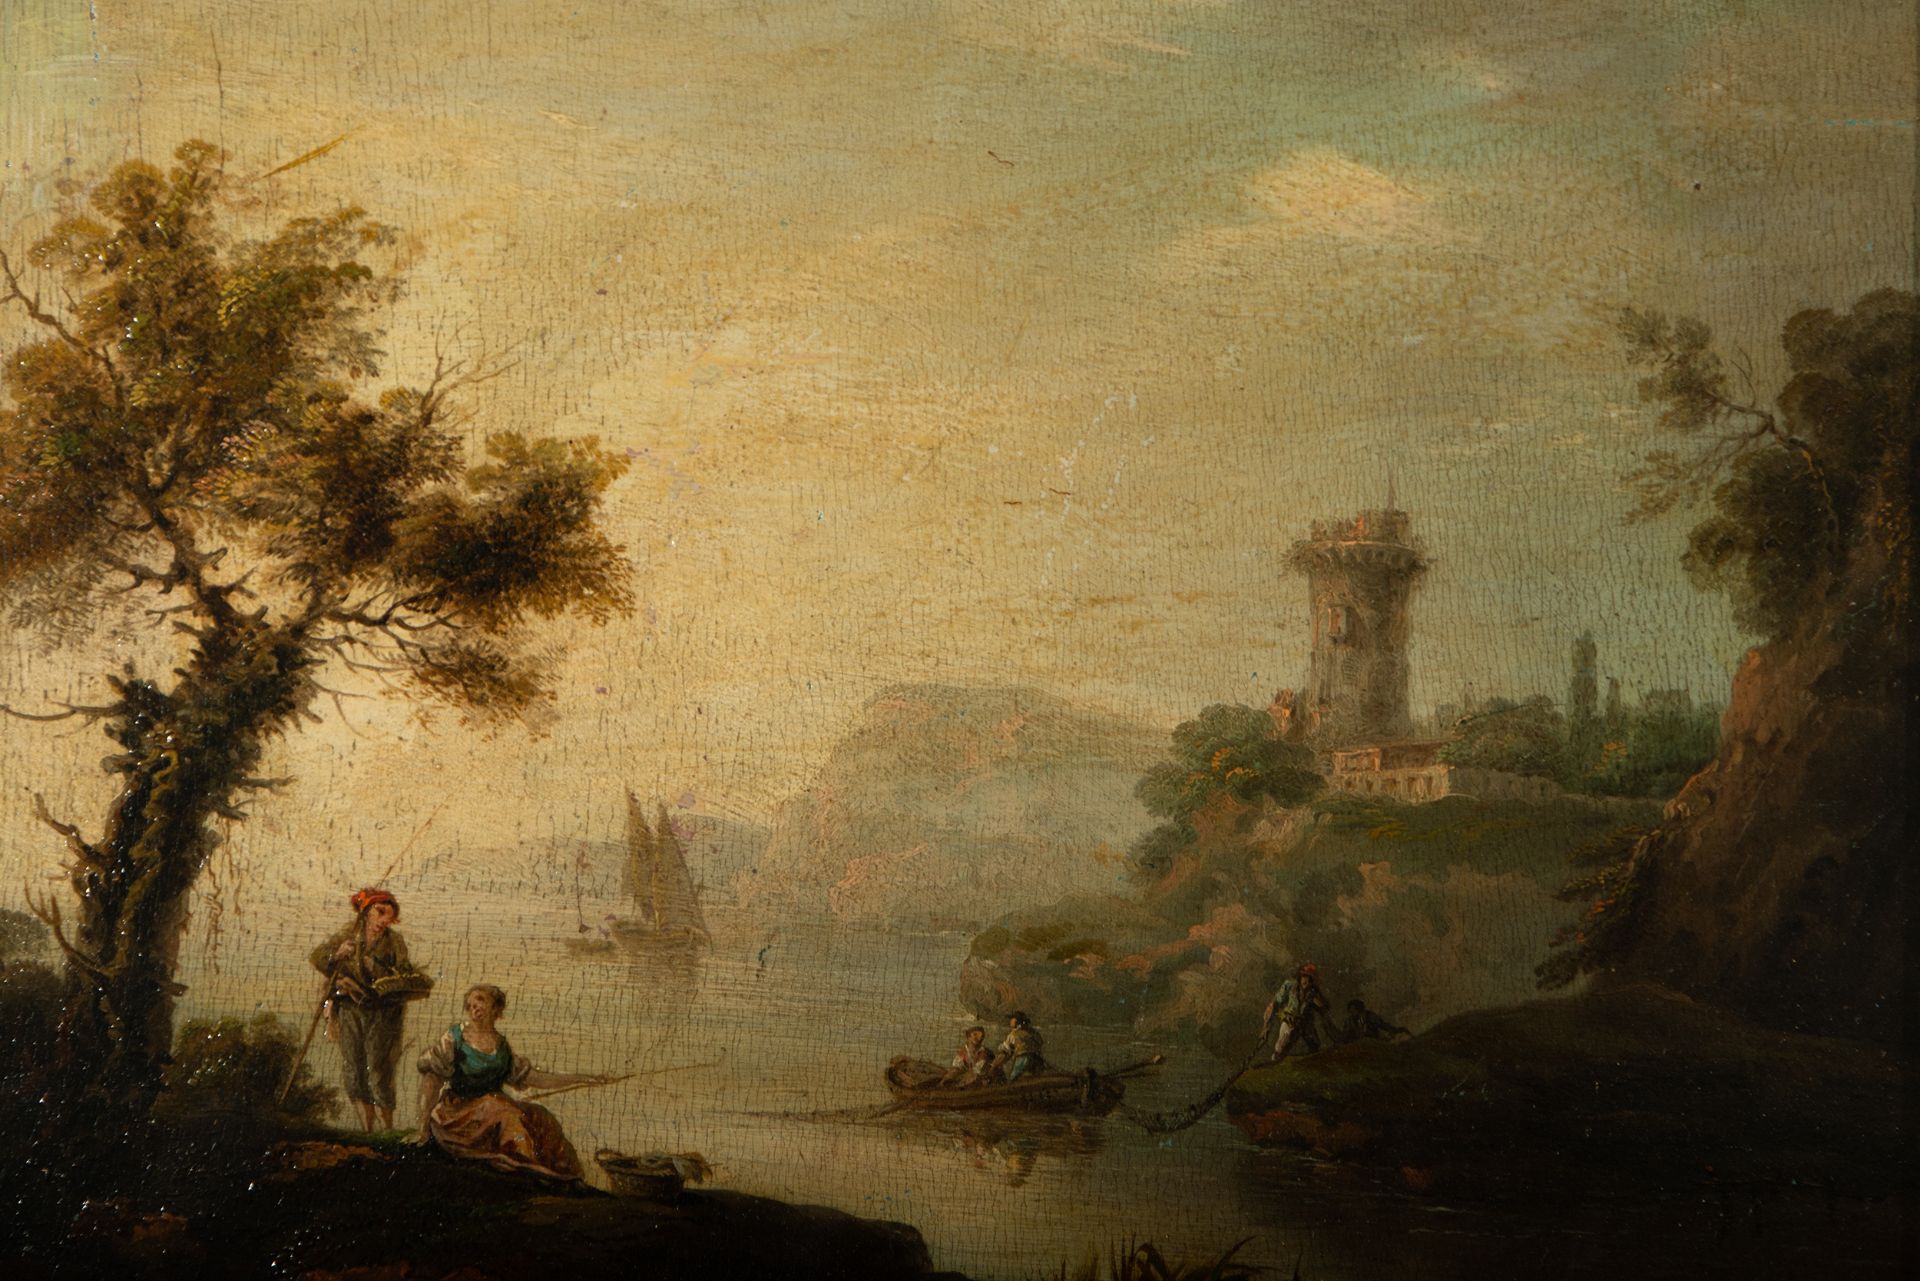 Gallant Scene on the Banks of a Lake, Italo-Flemish school of the 18th century - Image 2 of 6